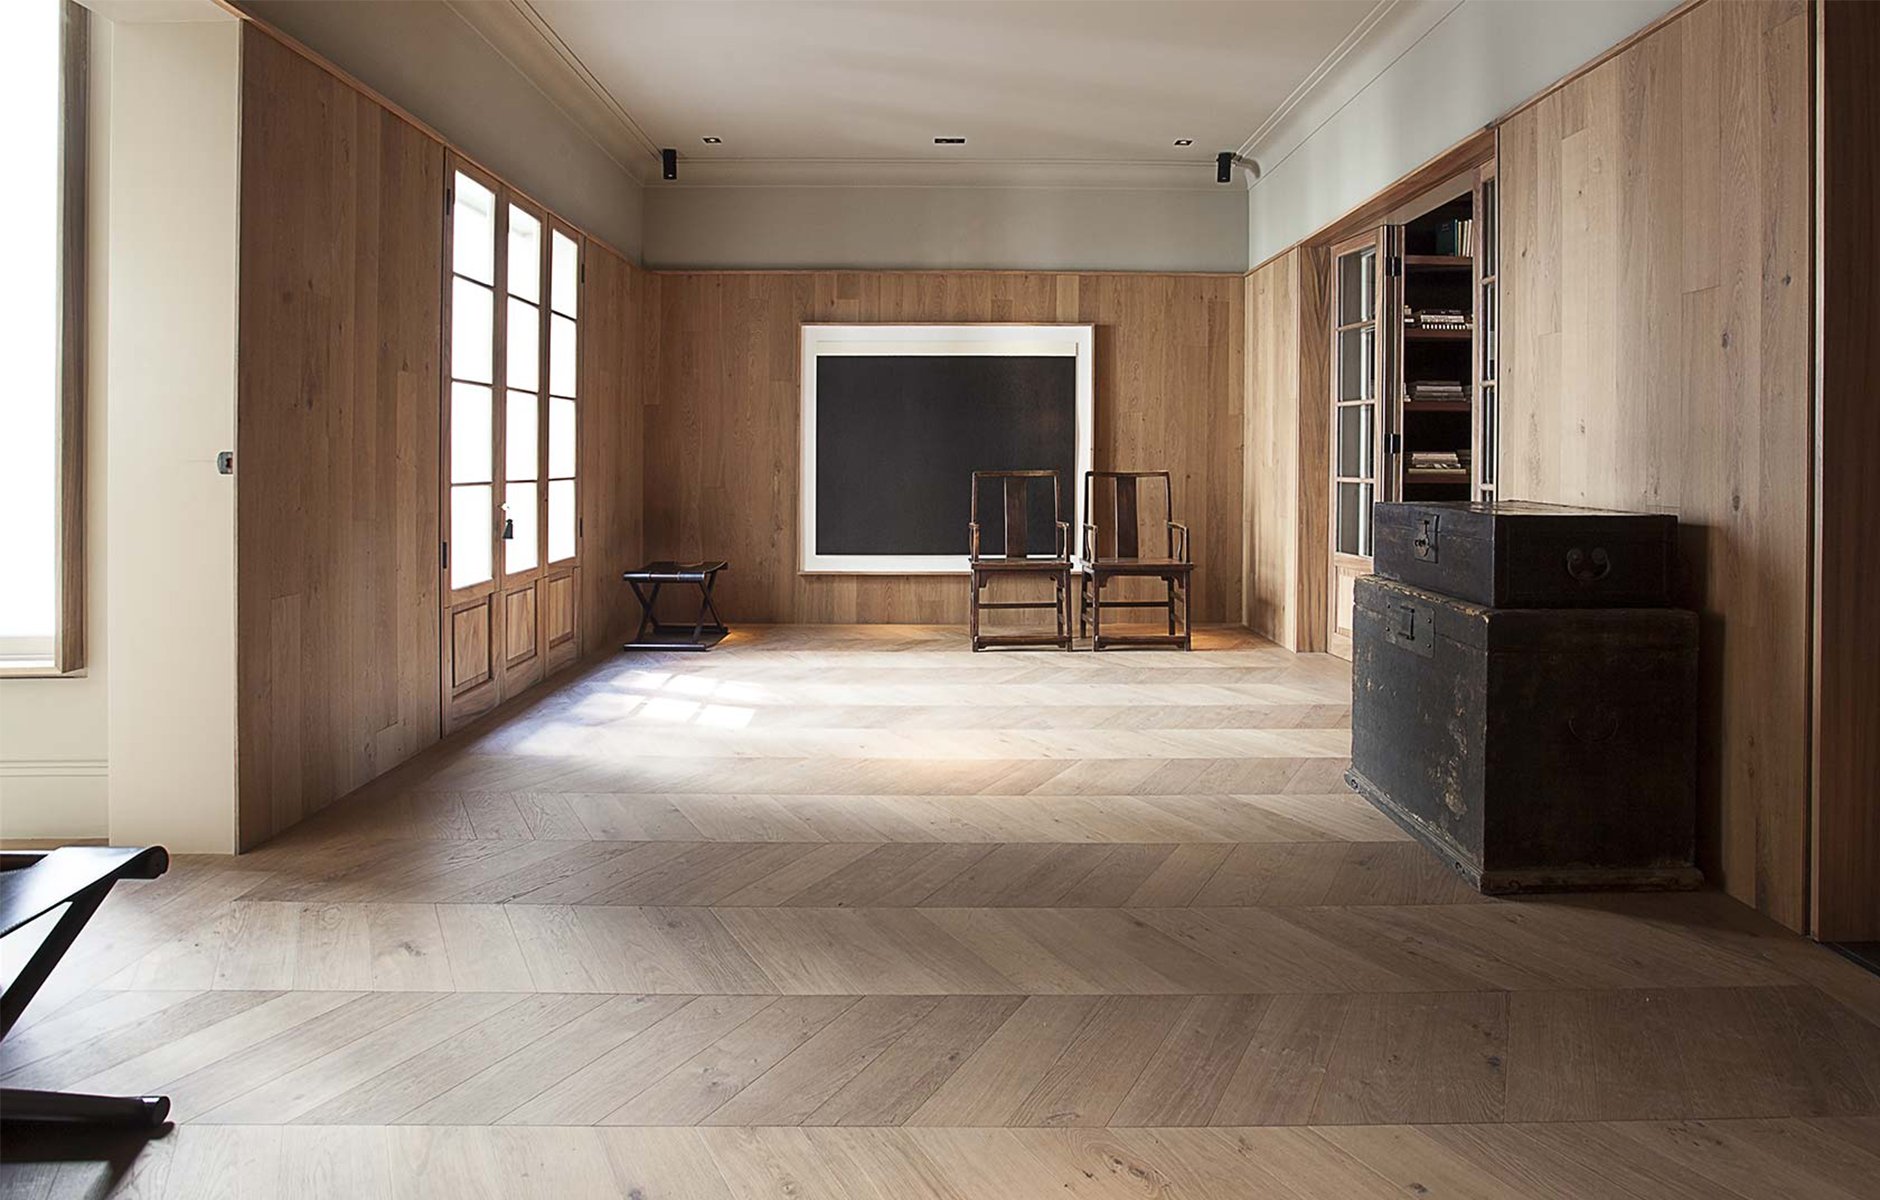 Featuring a special version of Heritage Civita with a steamed Oak finish, Rafael Rivera selected a refined Hungarian fishbone pattern on the floor and random straight planks on the walls for his transformaton of an historic home in Mexico City. Photo c/o Listone Giordano.